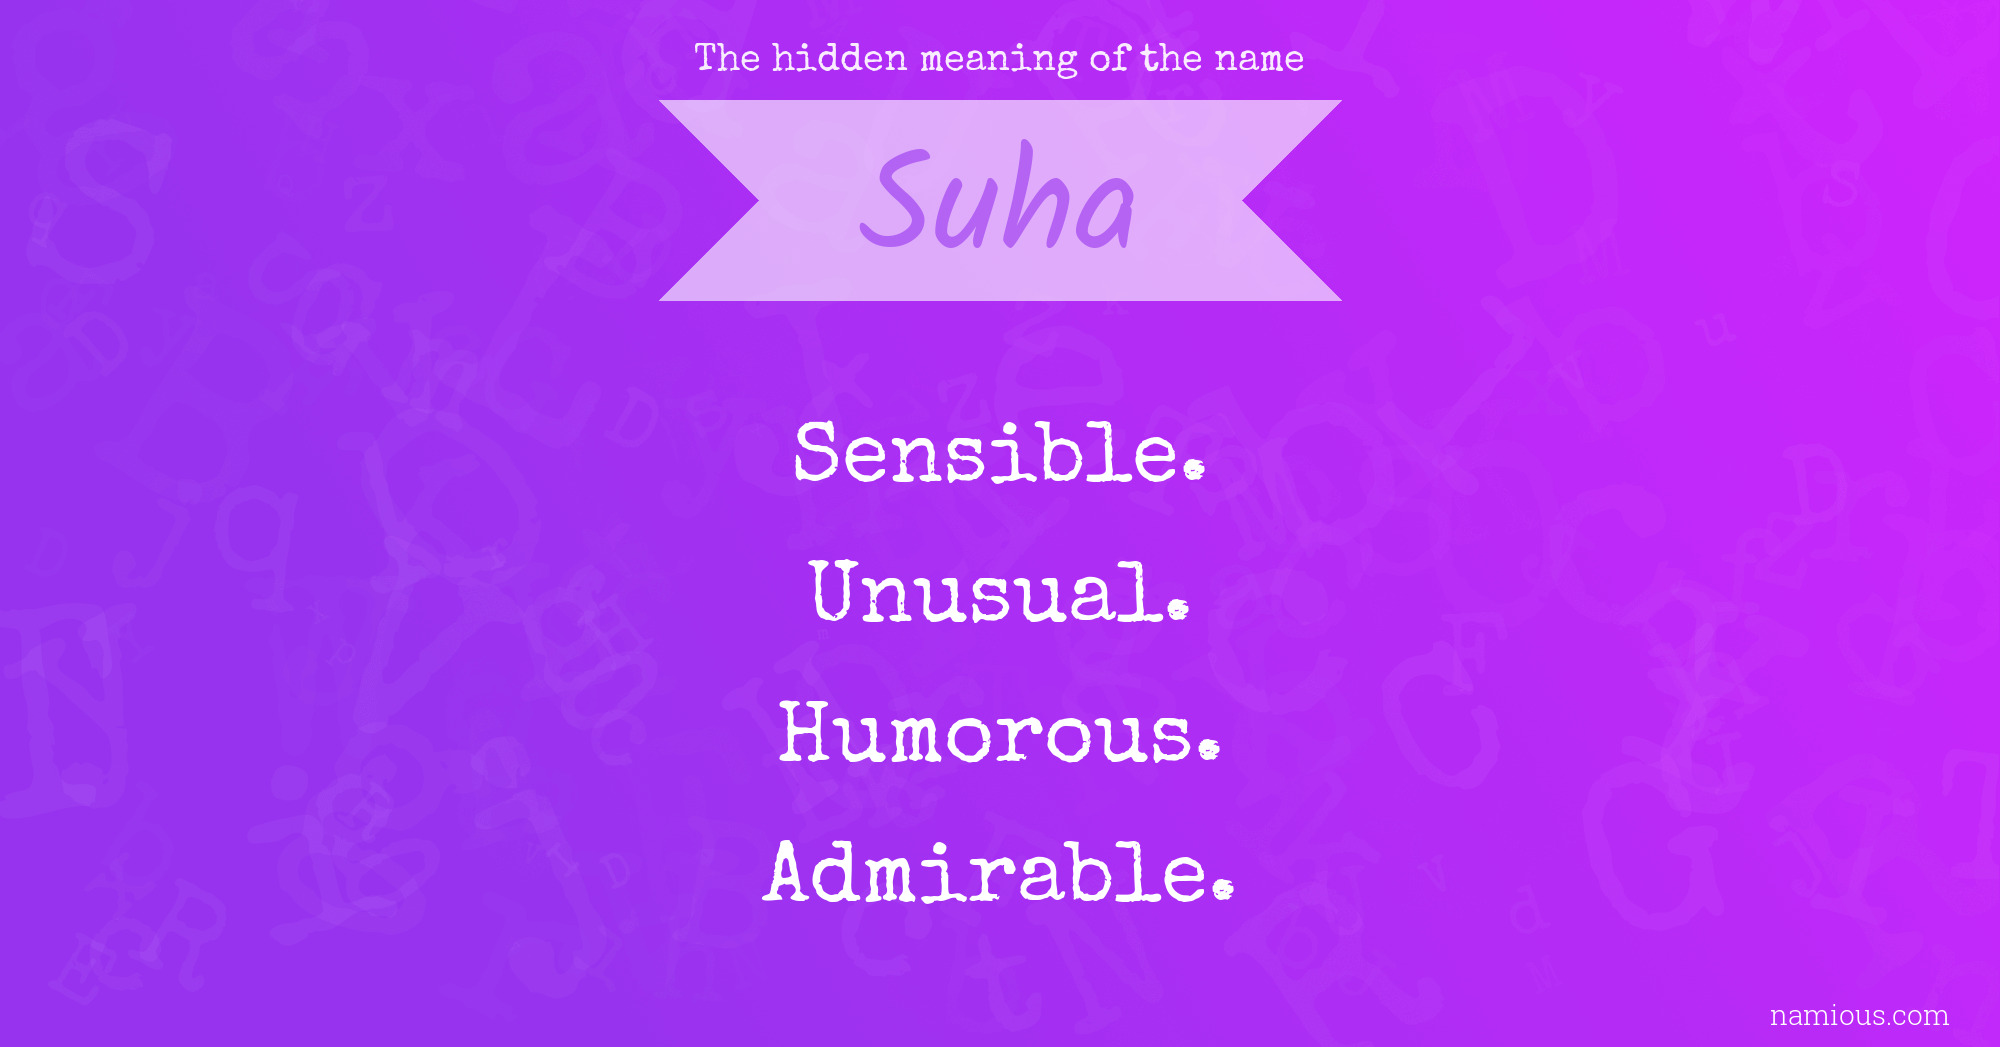 The hidden meaning of the name Suha